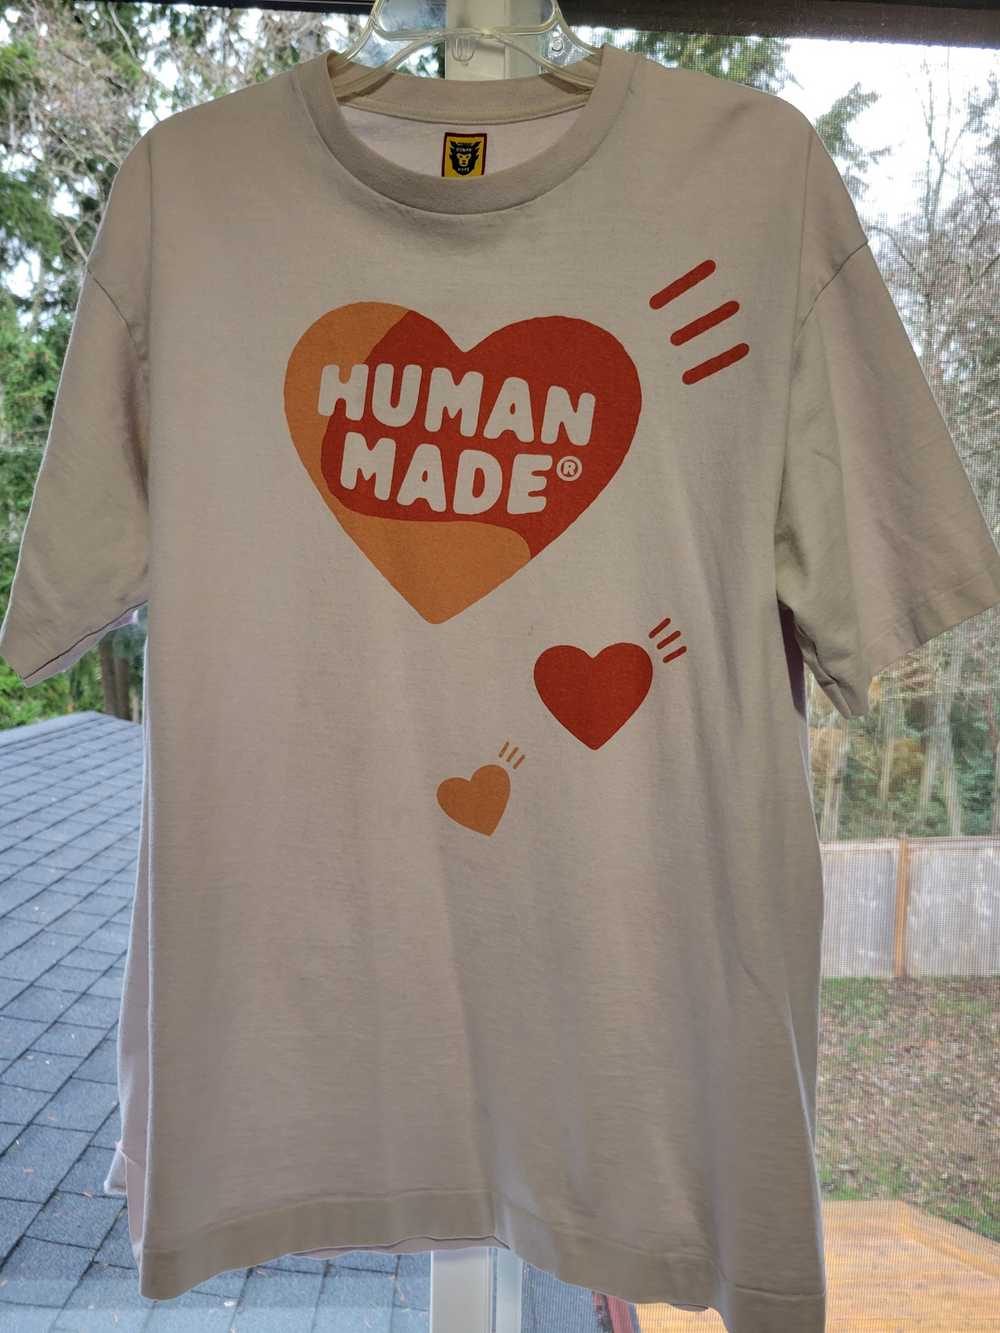 Human Made x WTAPS Ace of Hearts T-Shirt White 2XL 100% Authentic + NEW DS